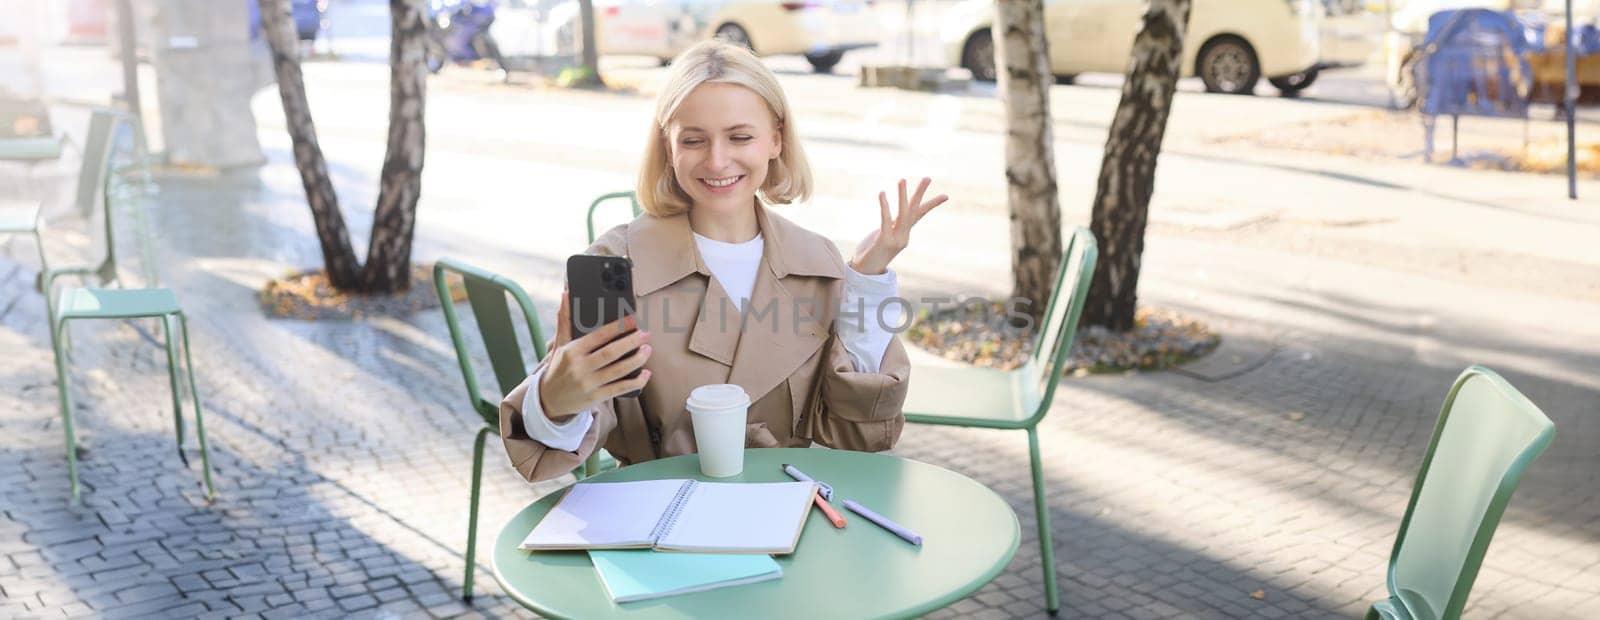 Image of young woman working outdoors in cafe, sitting outside with smartphone, video chatting, connecting to online meeting using mobile phone, smiling and looking happy.